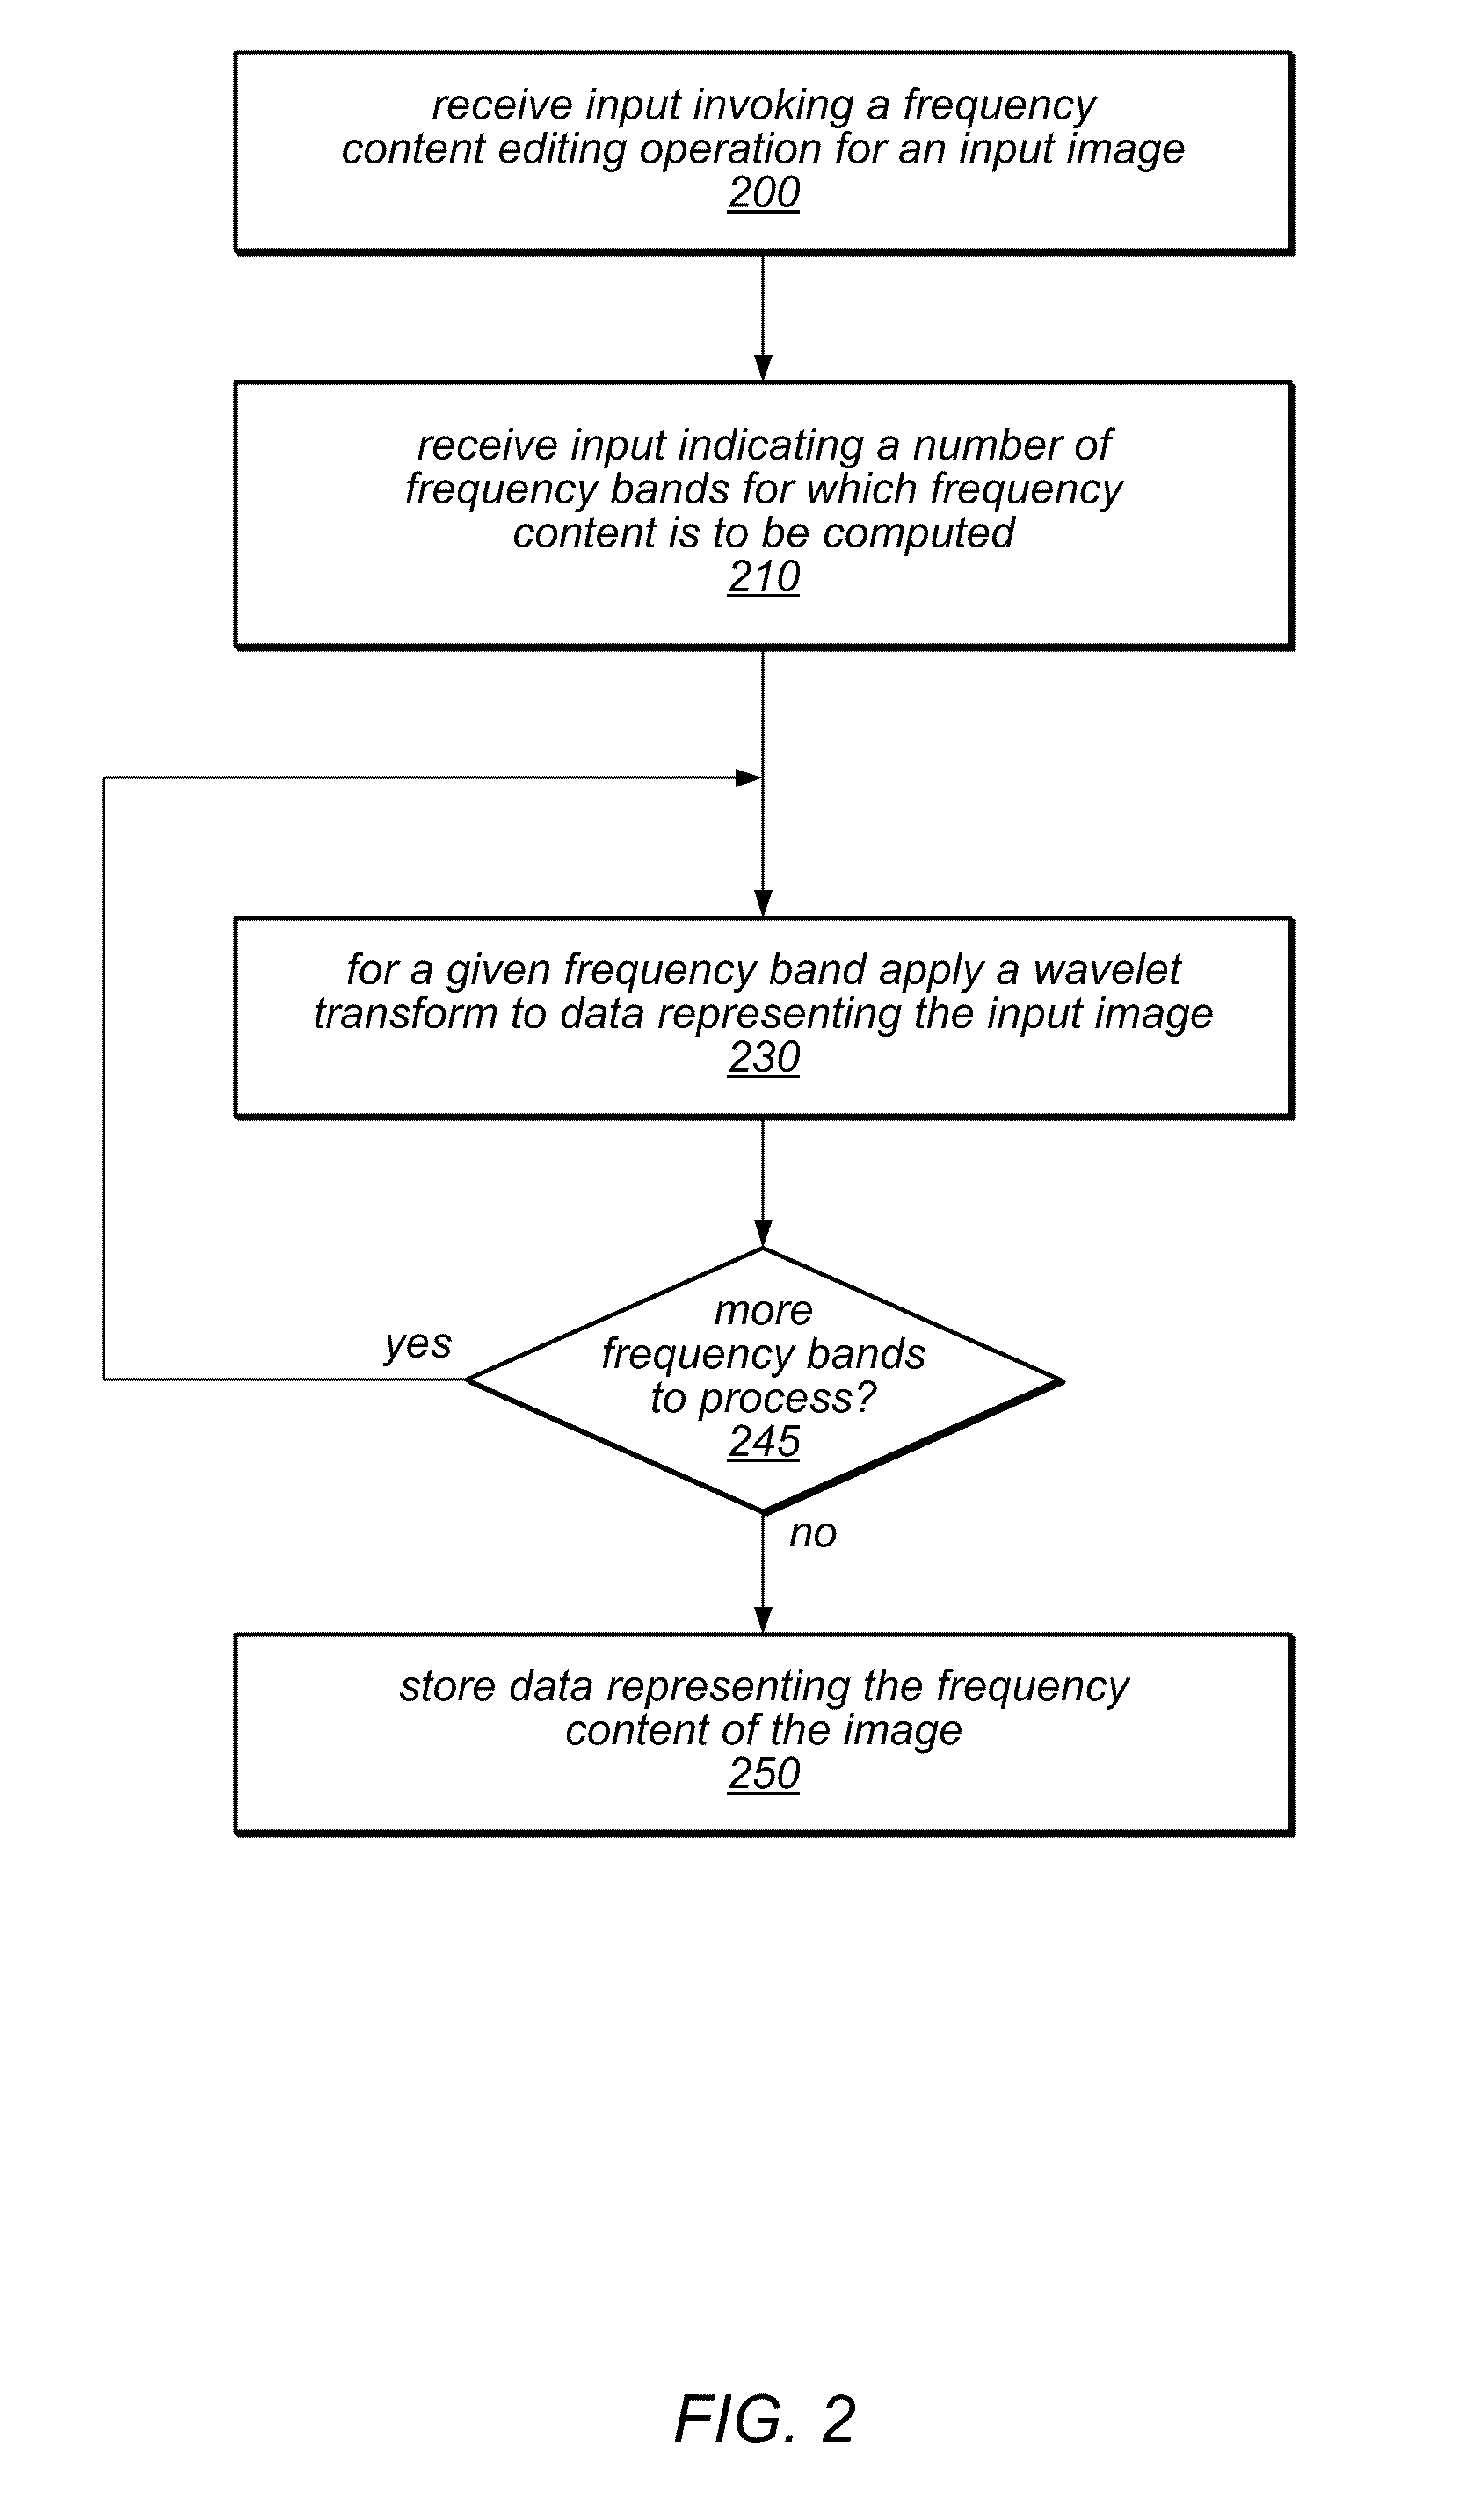 System and Method for Editing Frequency Content of Images